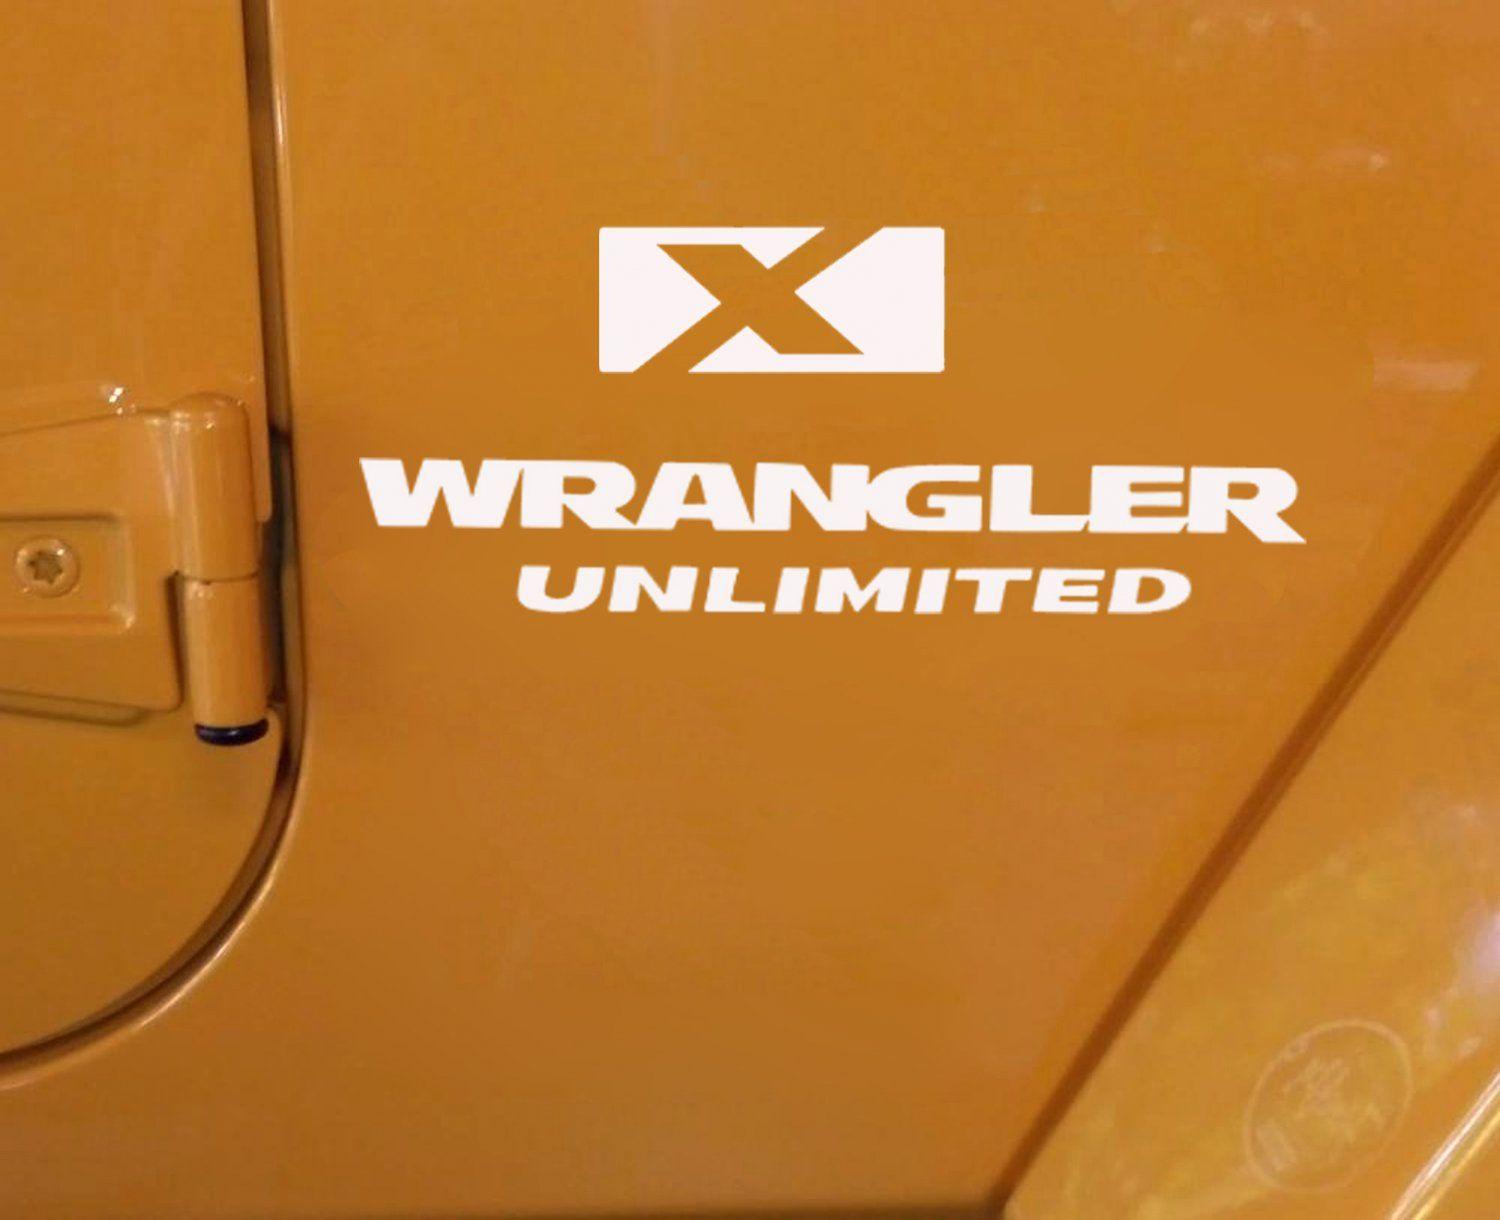 Jeep Wrangler X Logo - of Jeep wrangler unlimited X Decal Stickers Logo white color